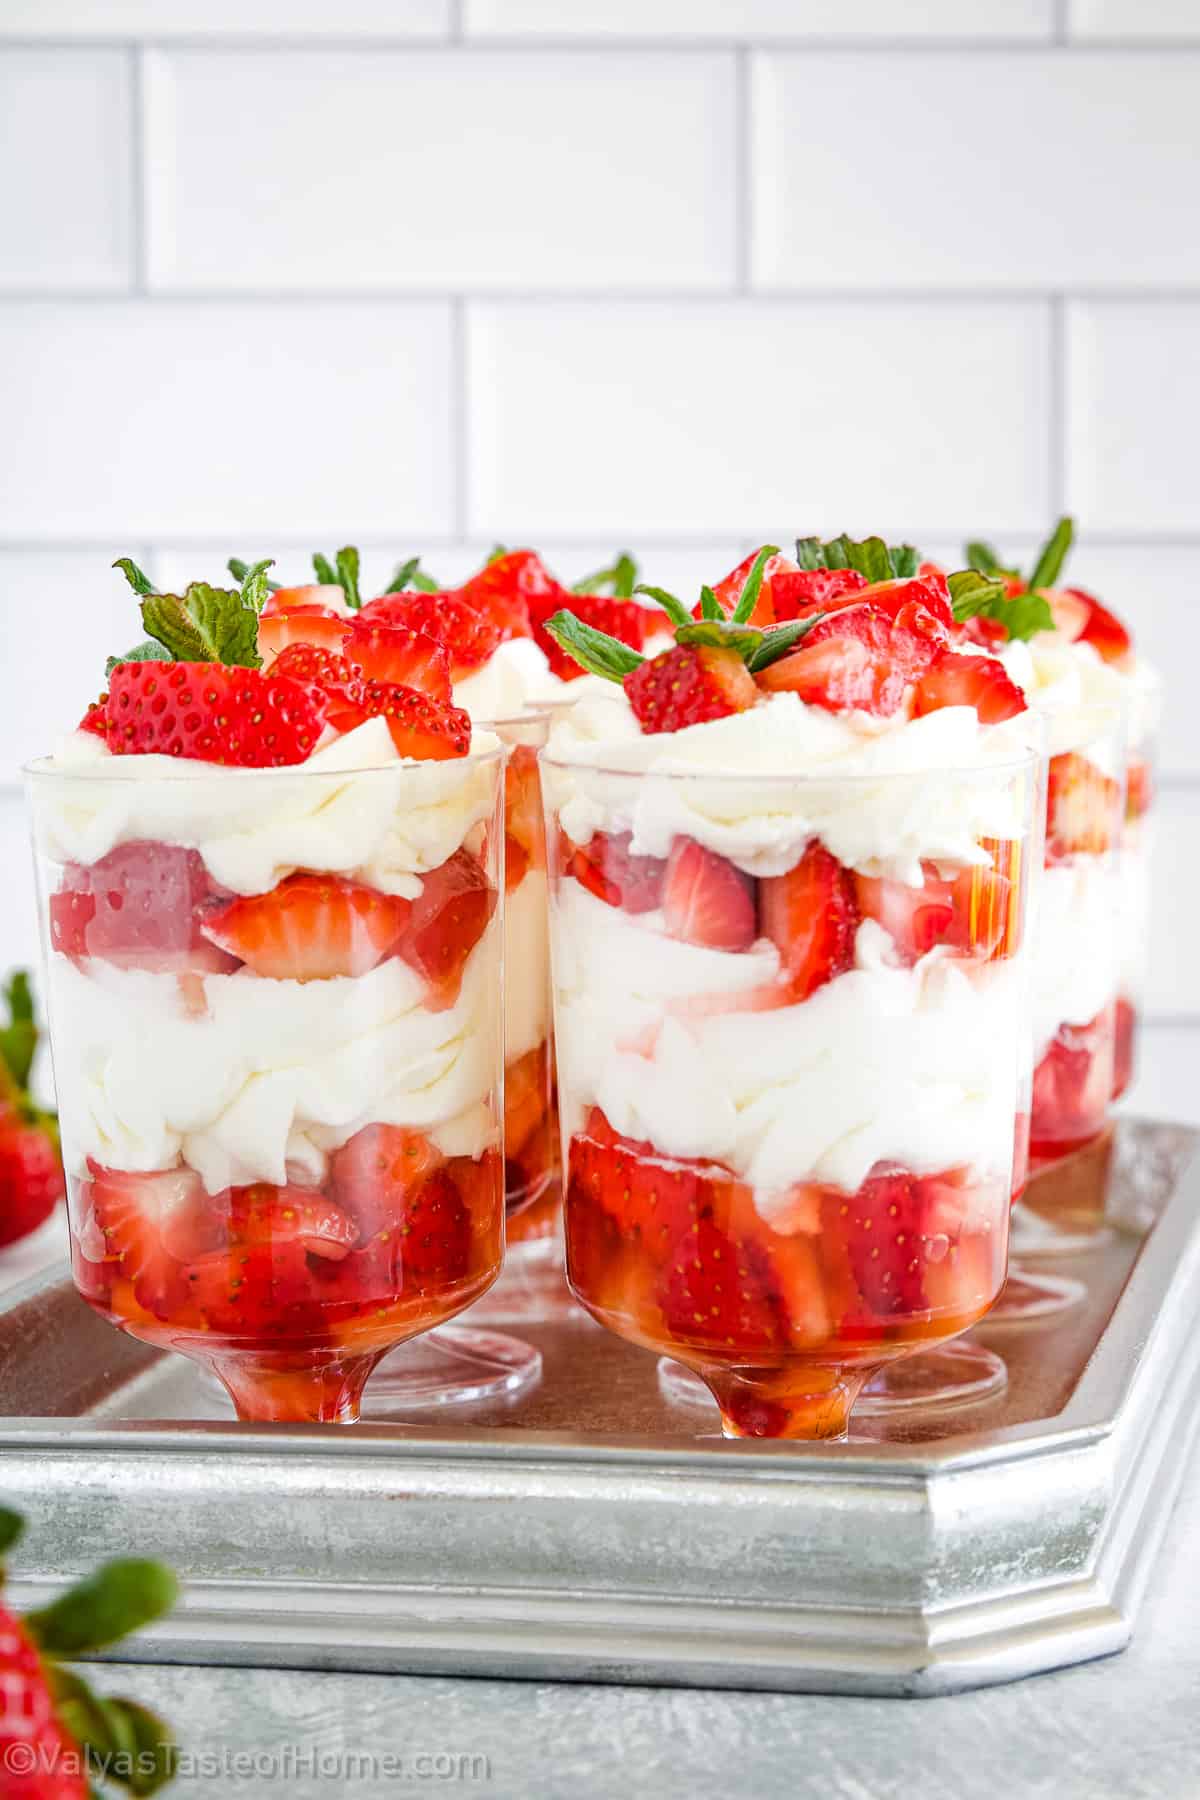 This is a classic dessert that combines the sweetness of fresh, juicy strawberries with the richness of perfectly whipped cream!